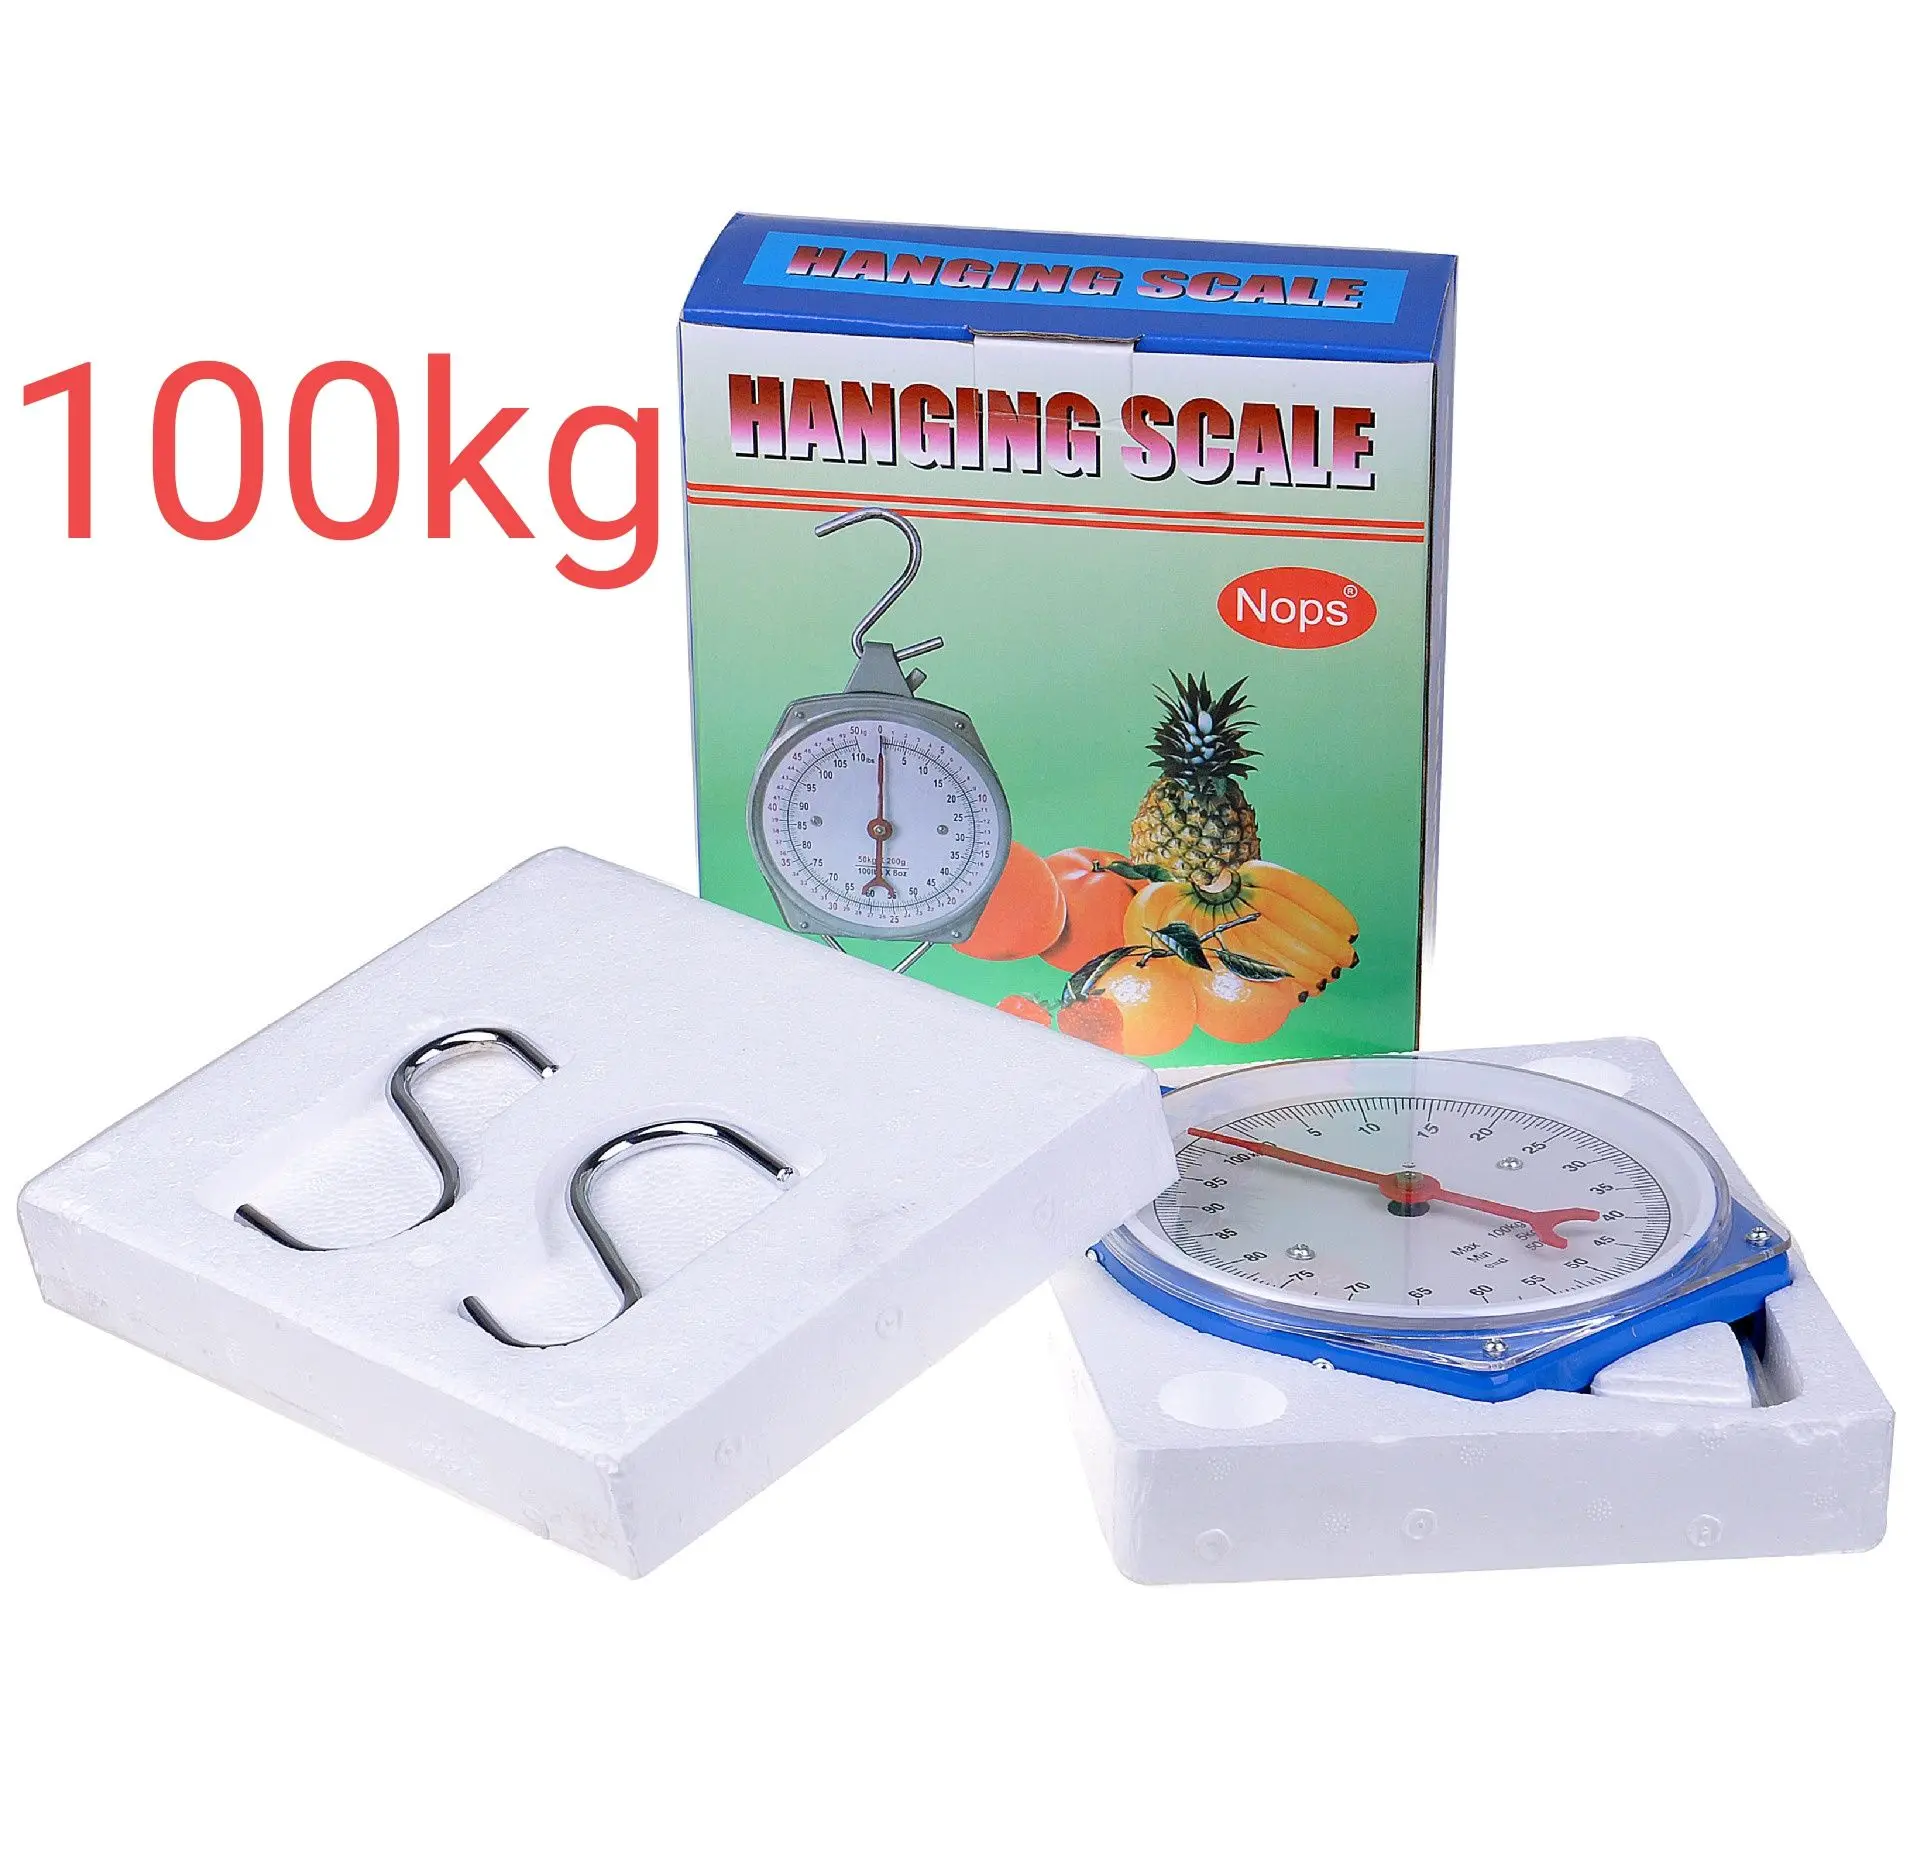 Hanging scale 100kg